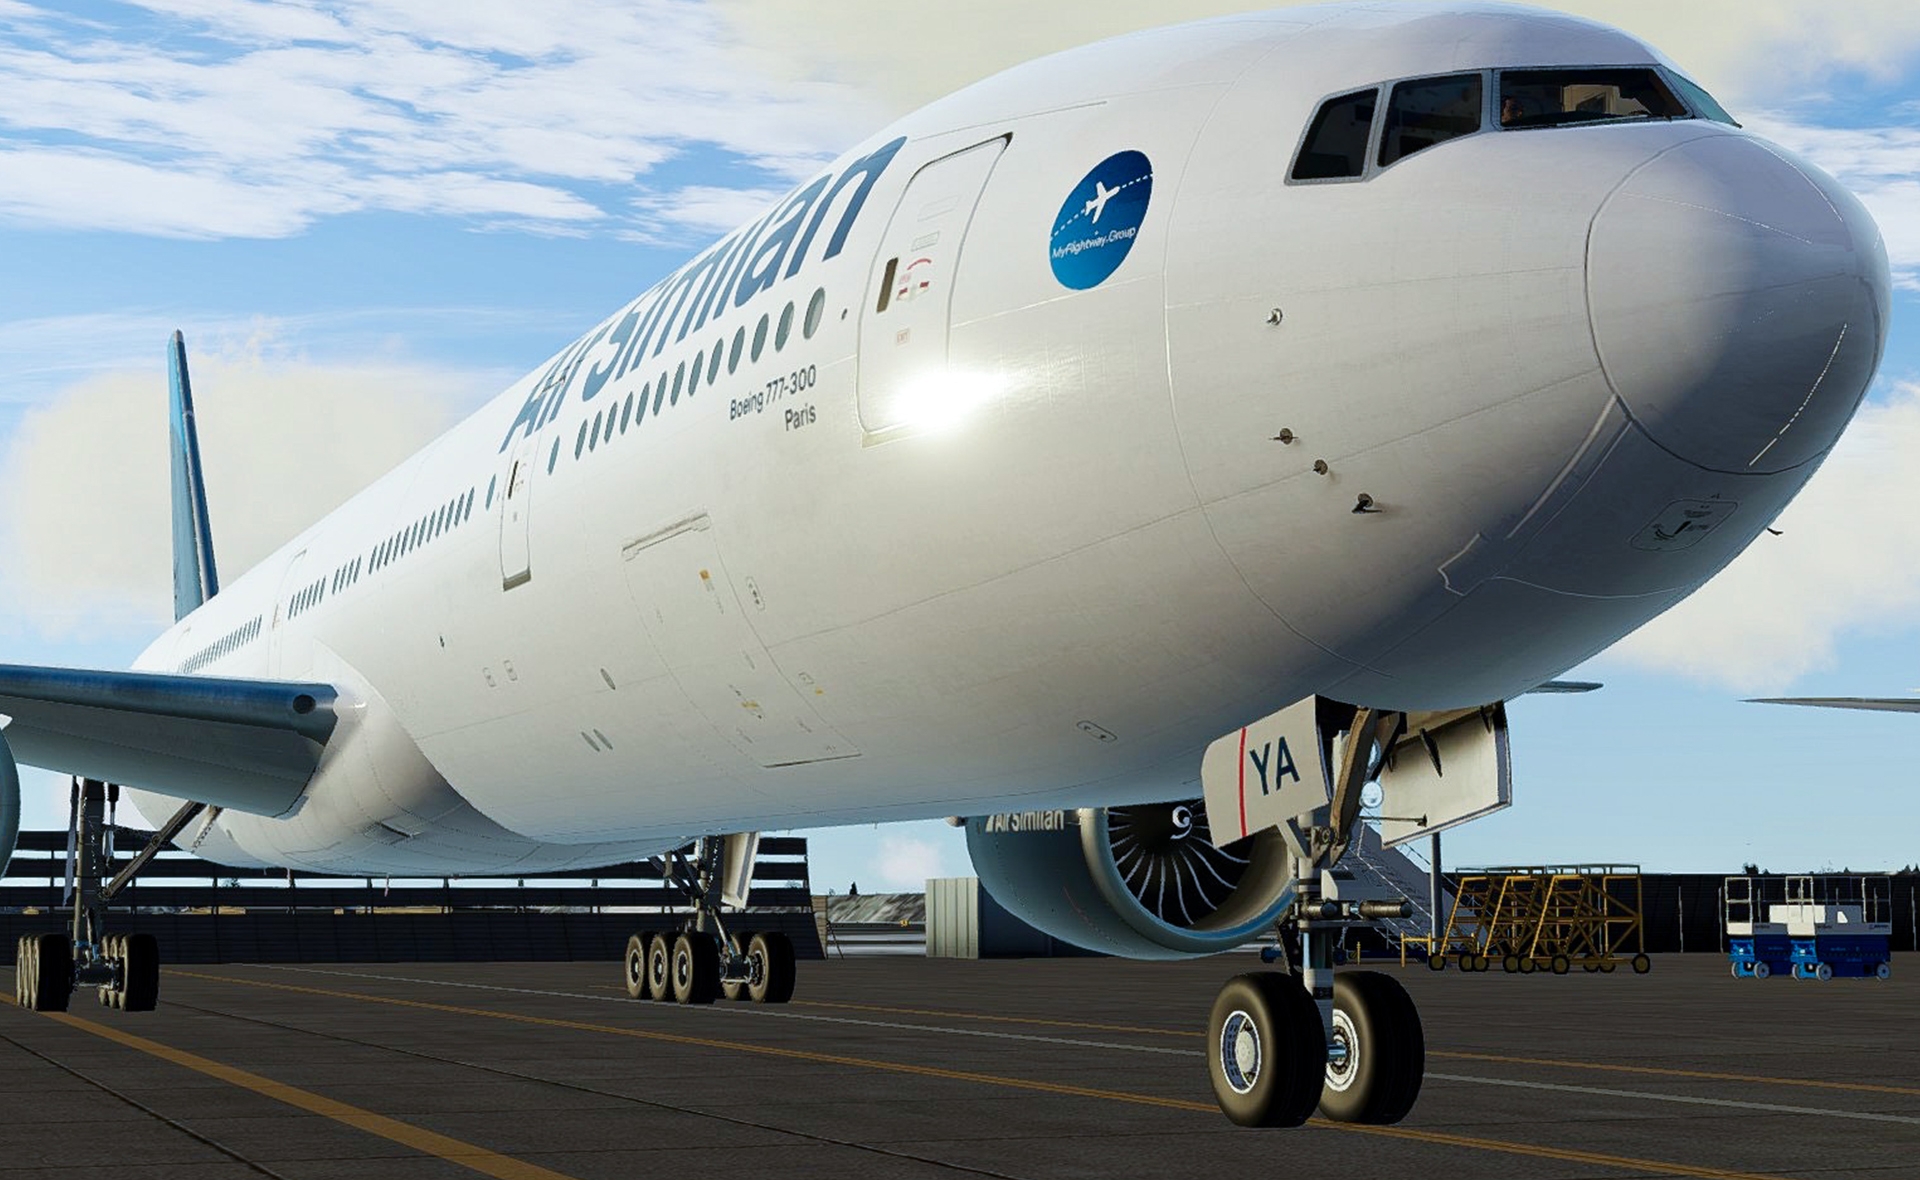 Welcome to the Boeing 777 and long-haul